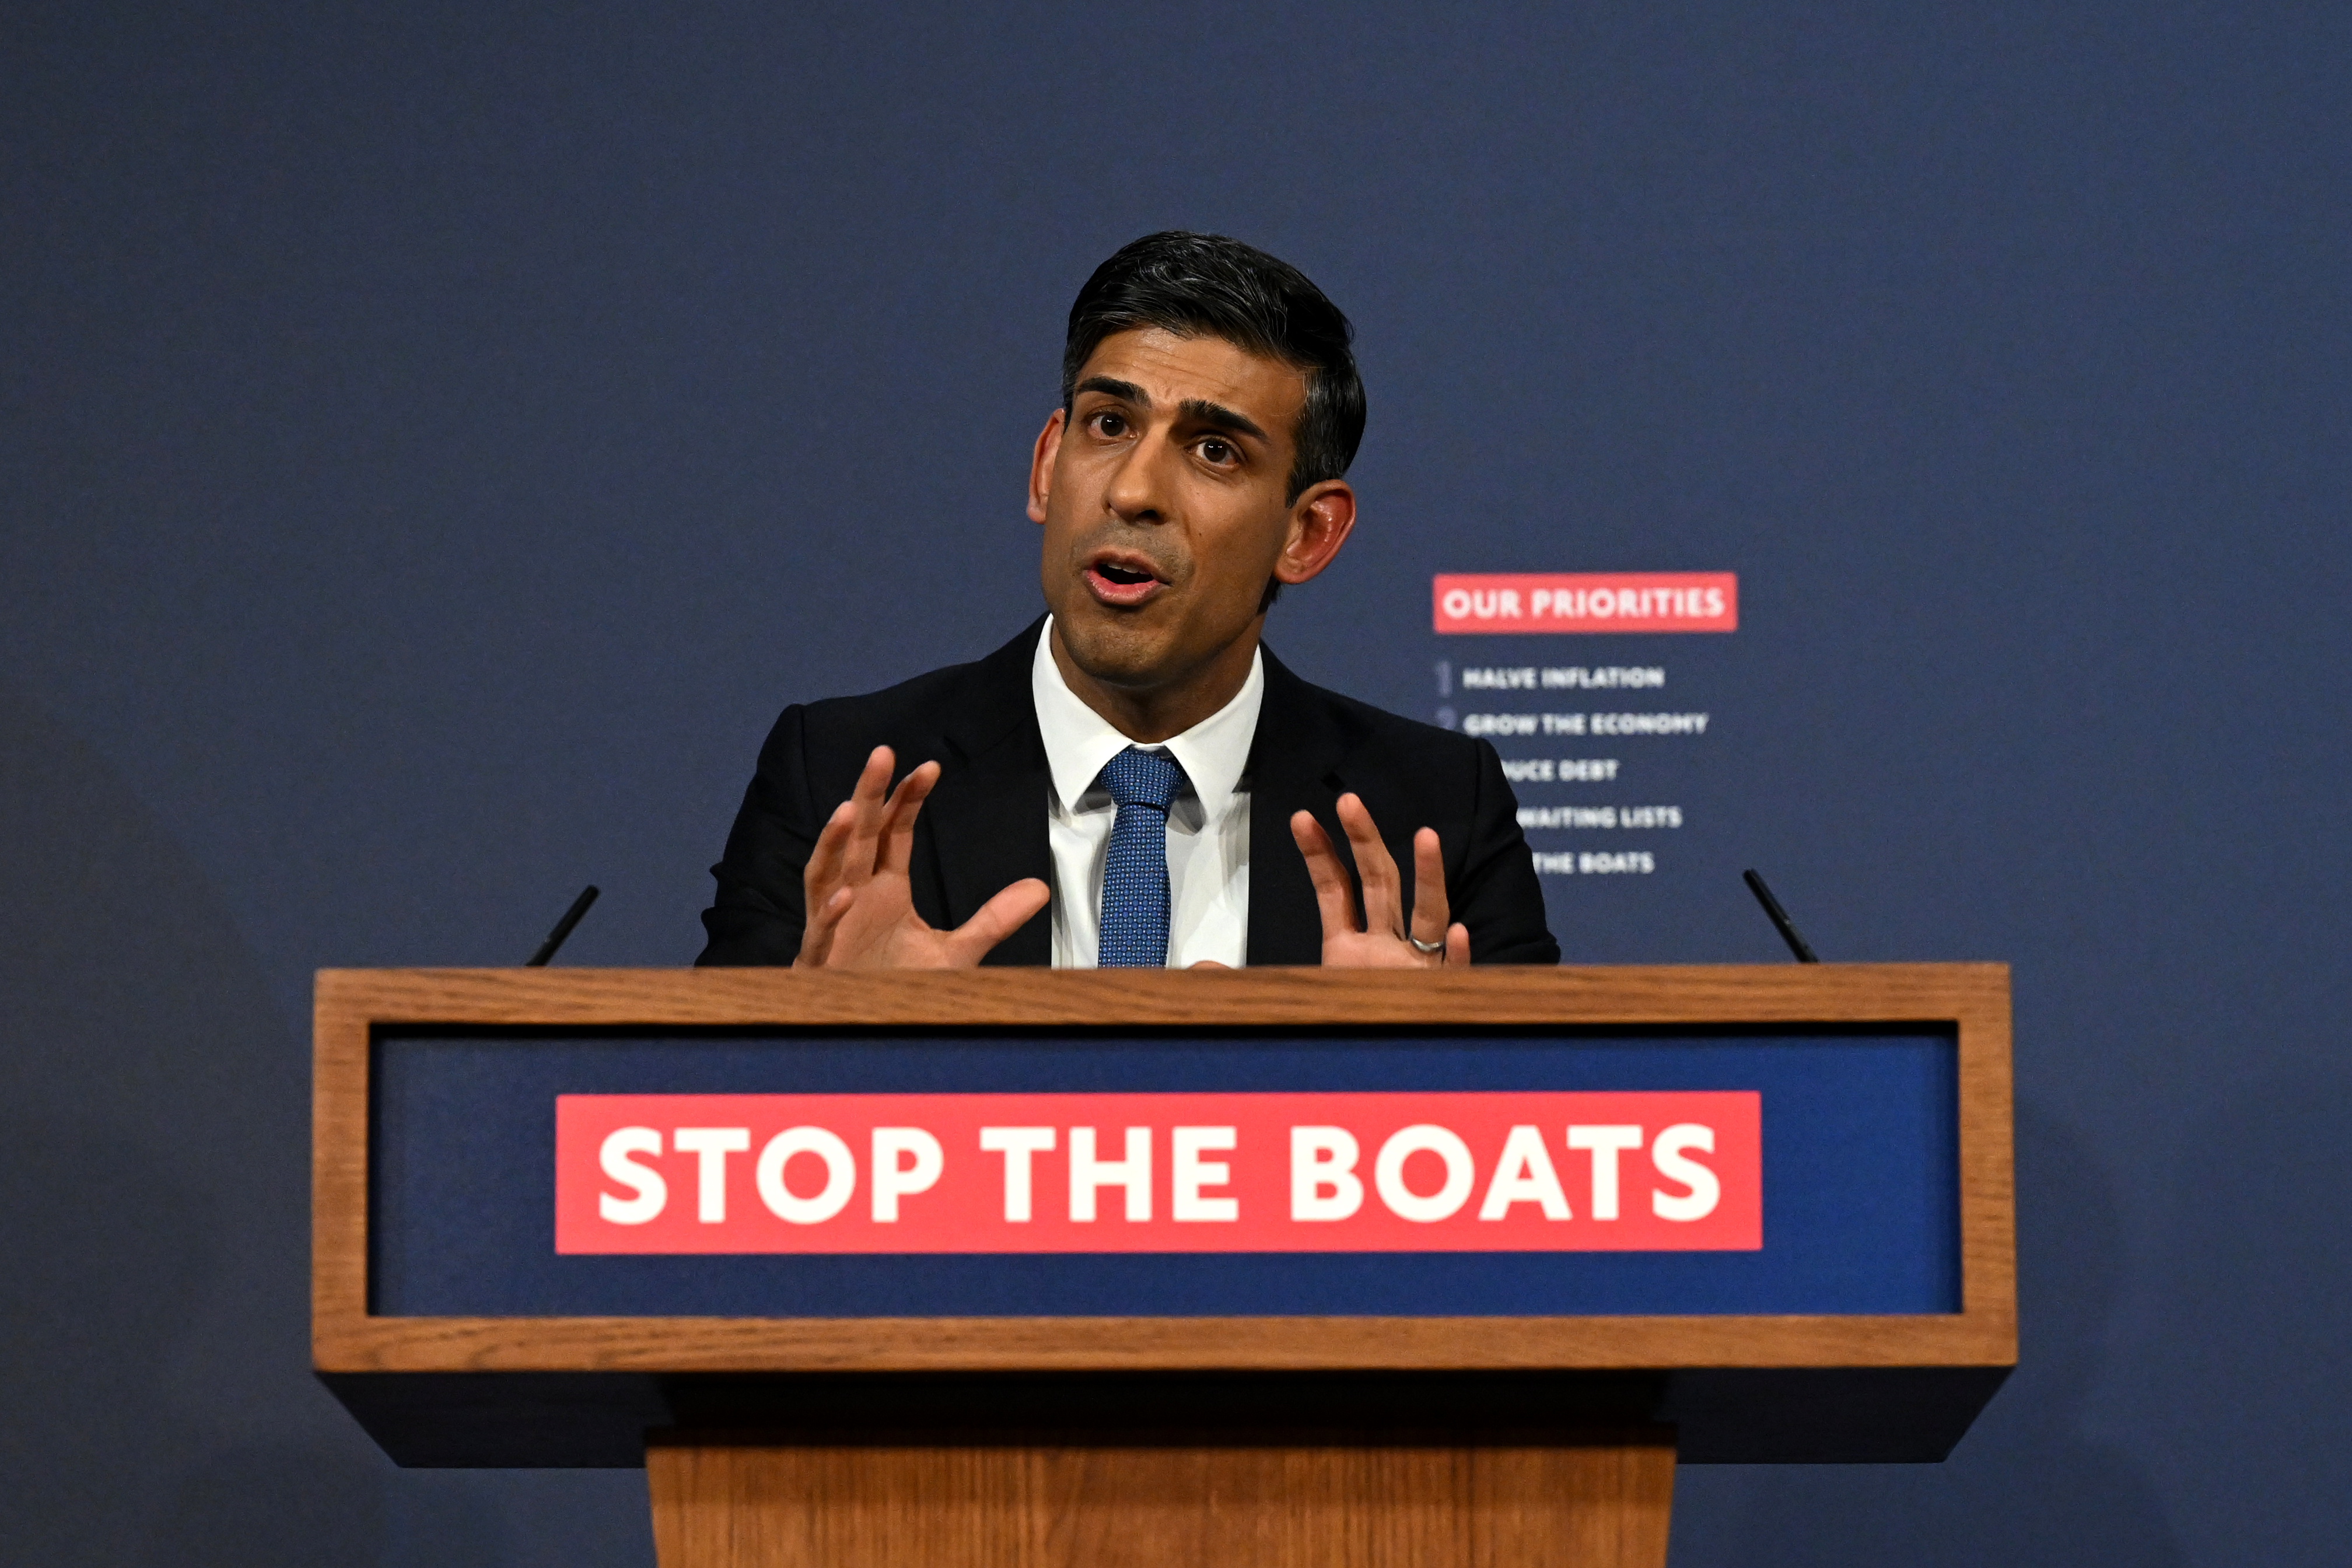 British Prime Minister Rishi Sunak, wearing a dark suit with a white shirt and blue tie, gestures while speaking from behind a podium with a sign reading “Stop the Boats.”